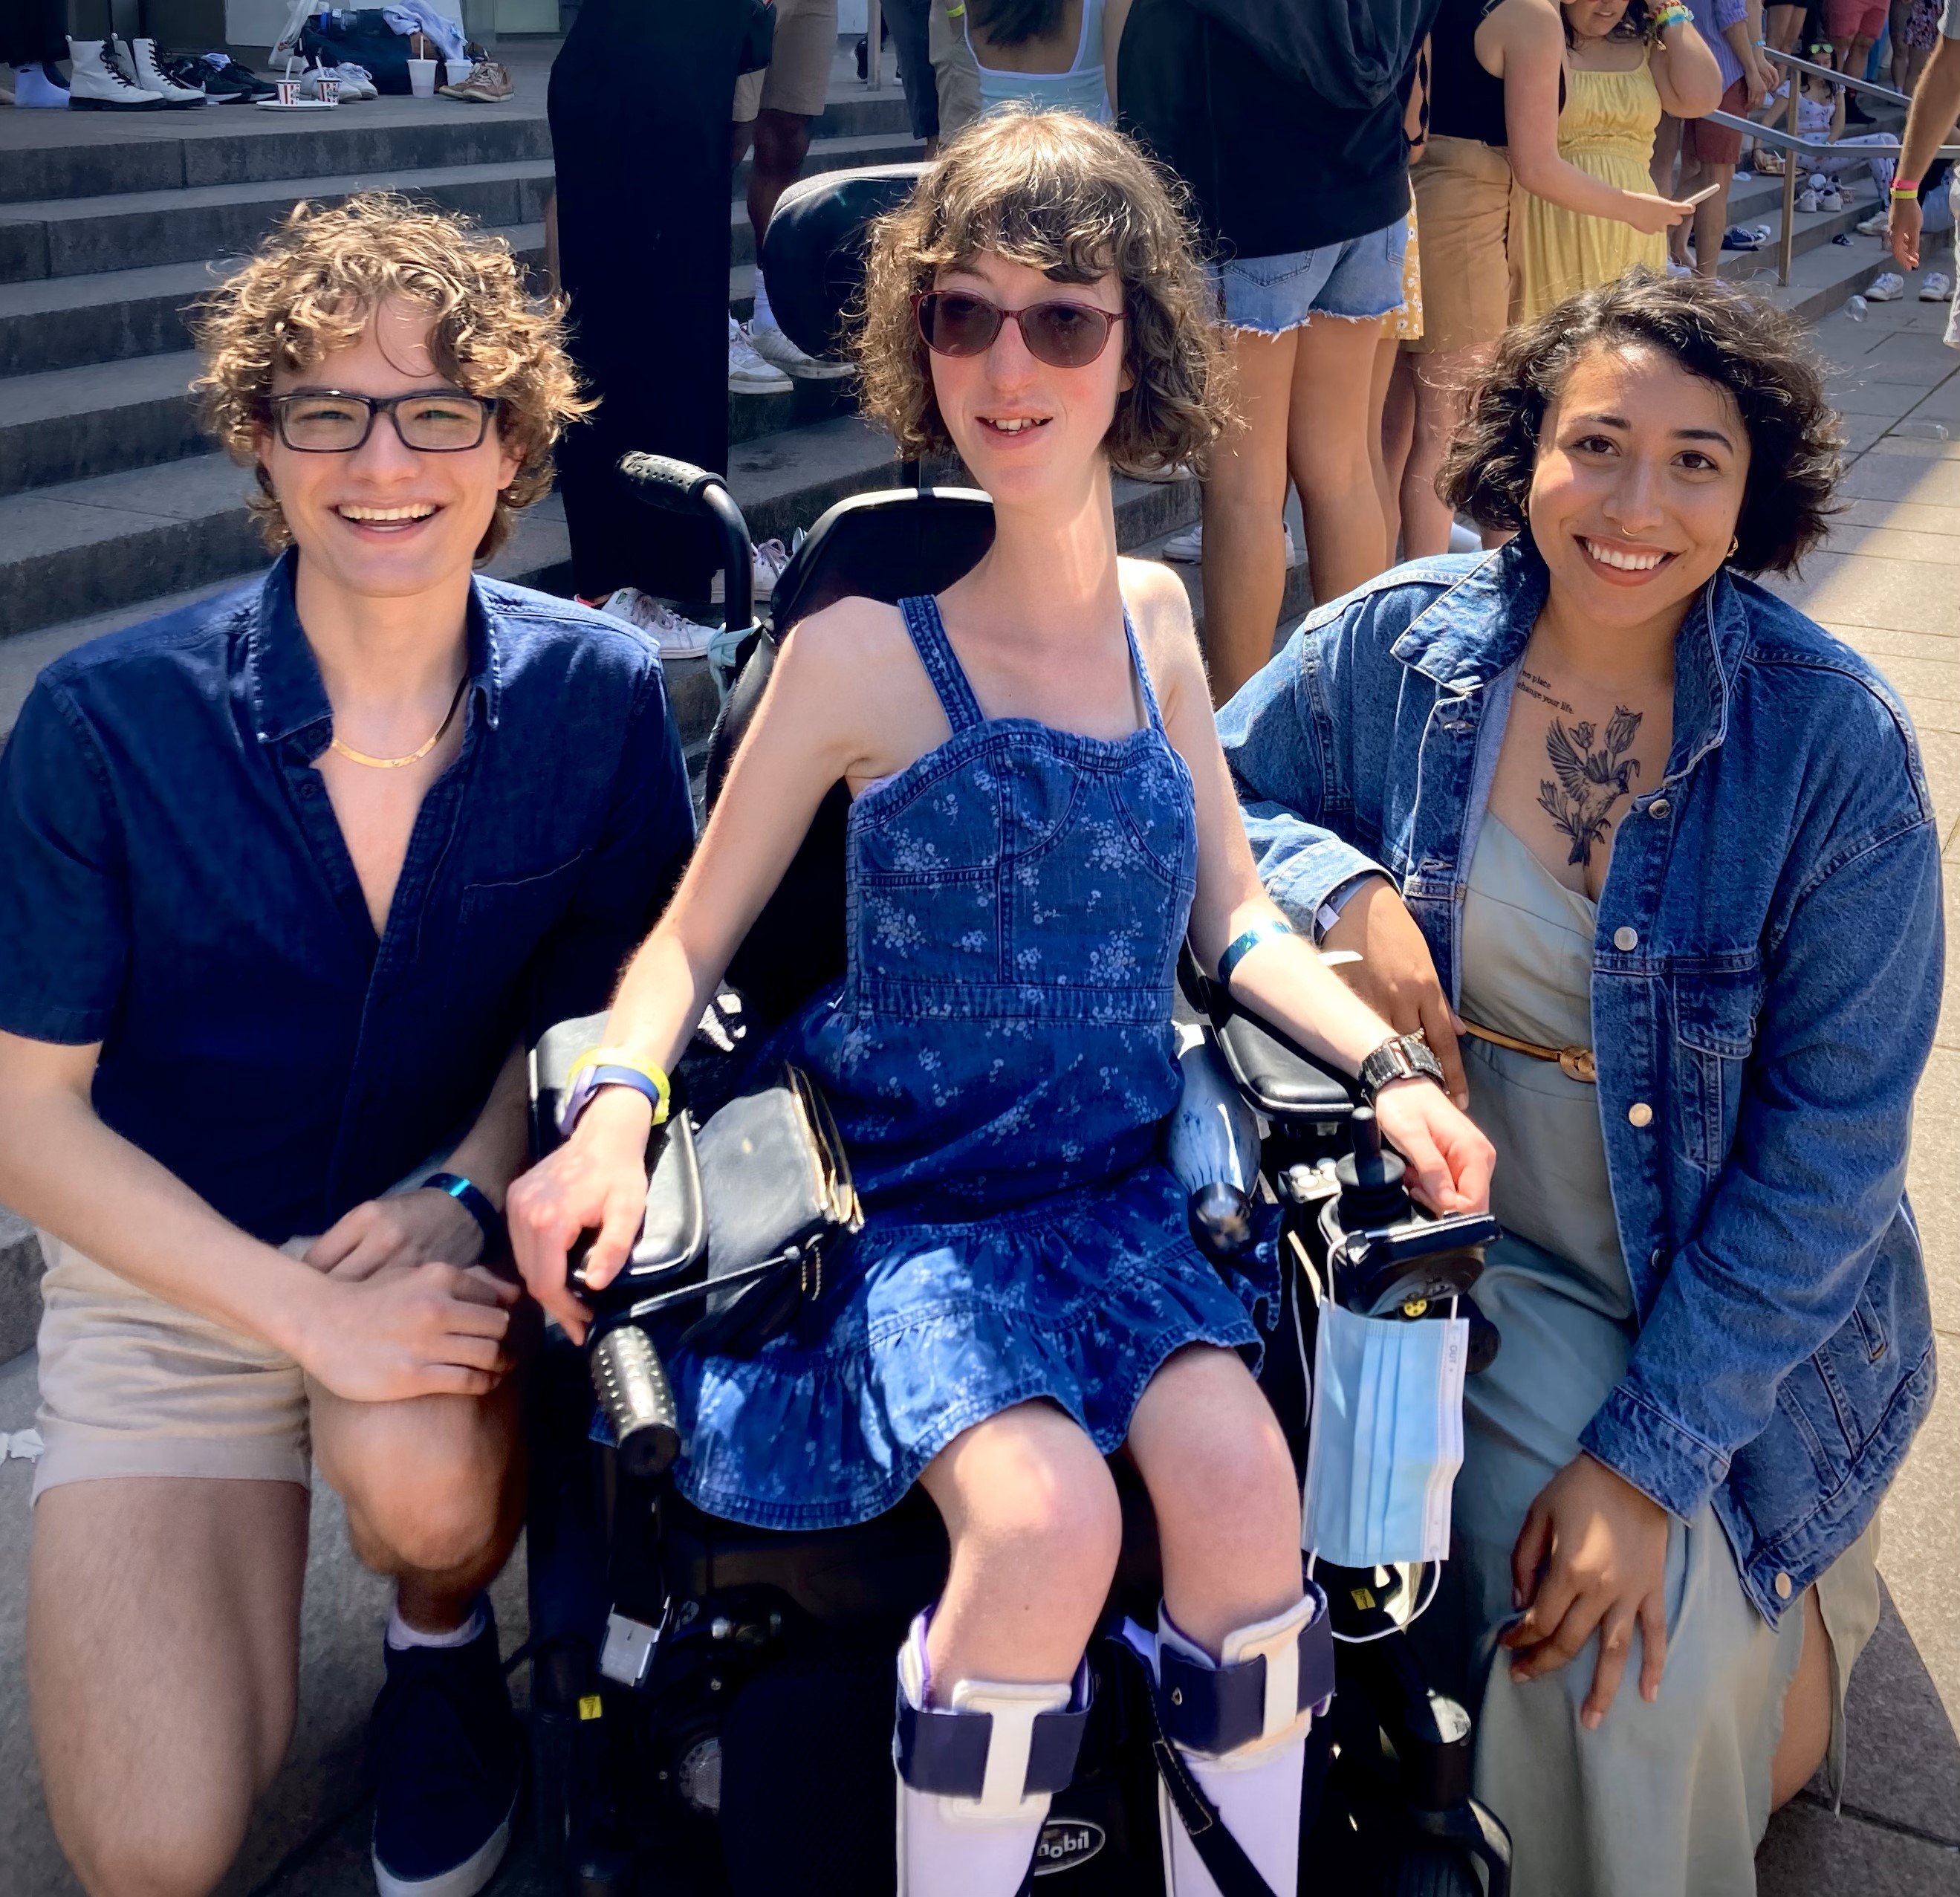 Harper (left) with two other fellows; Harper and one other fellow are squatting on a paved patio, the middle fellow is using a wheelchair